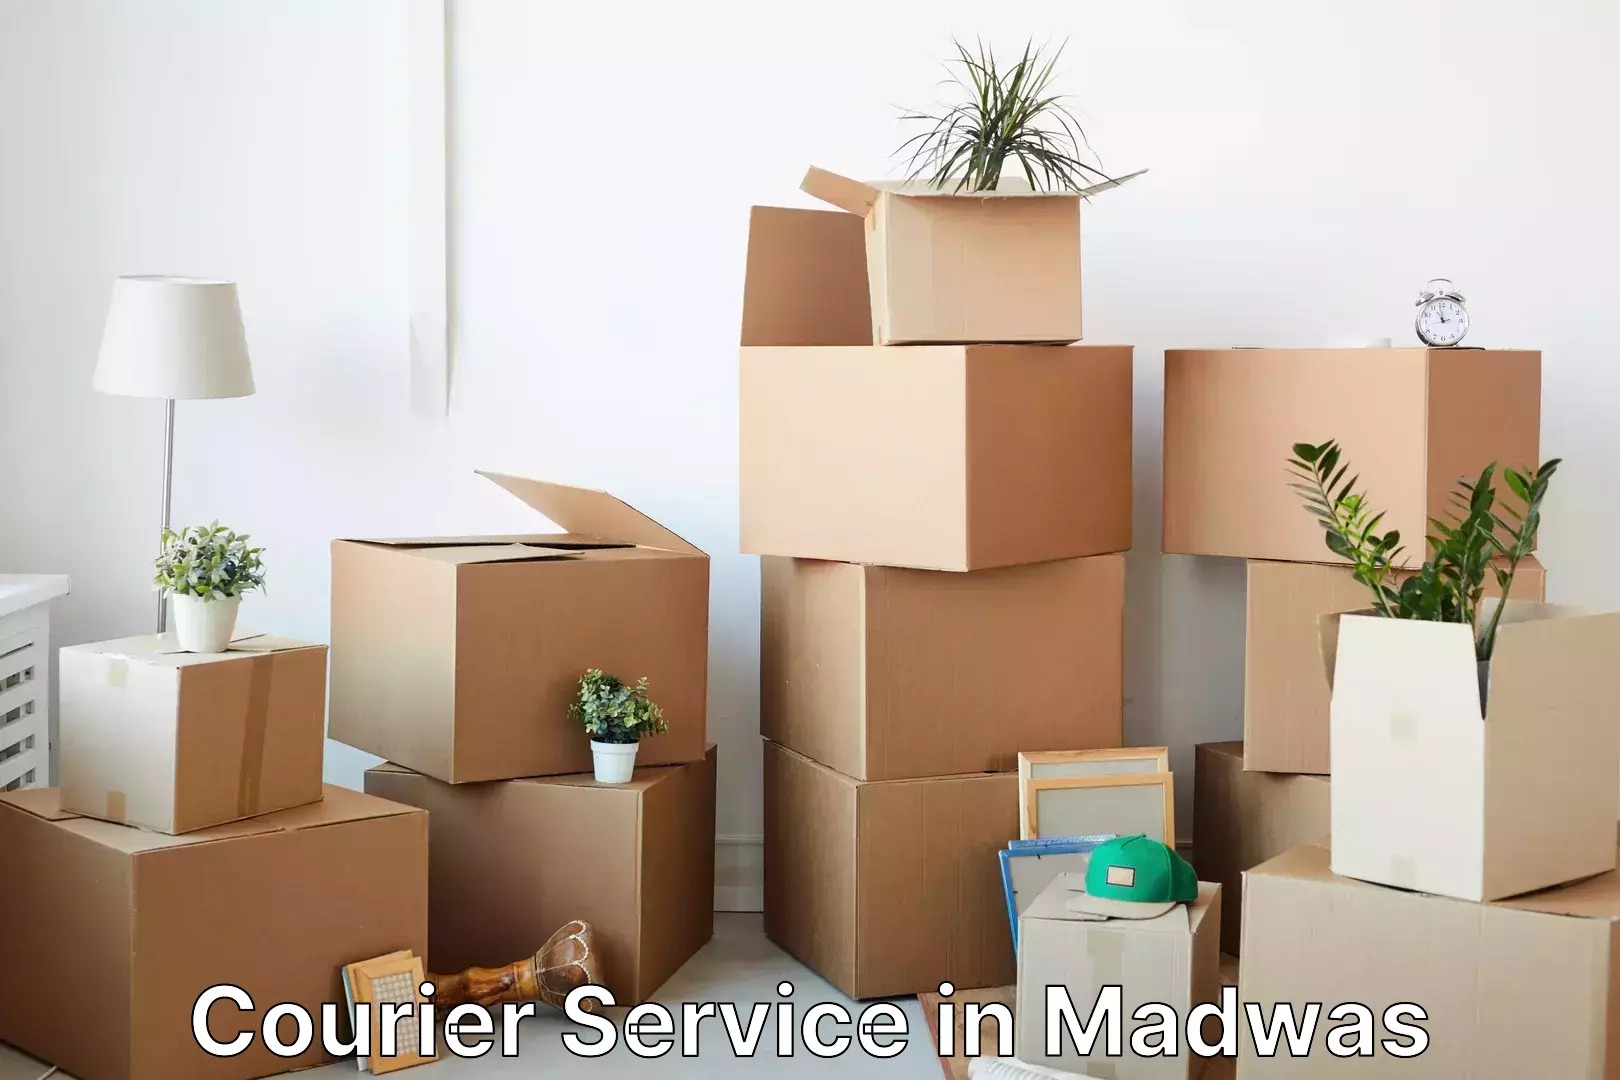 Overnight delivery services in Madwas